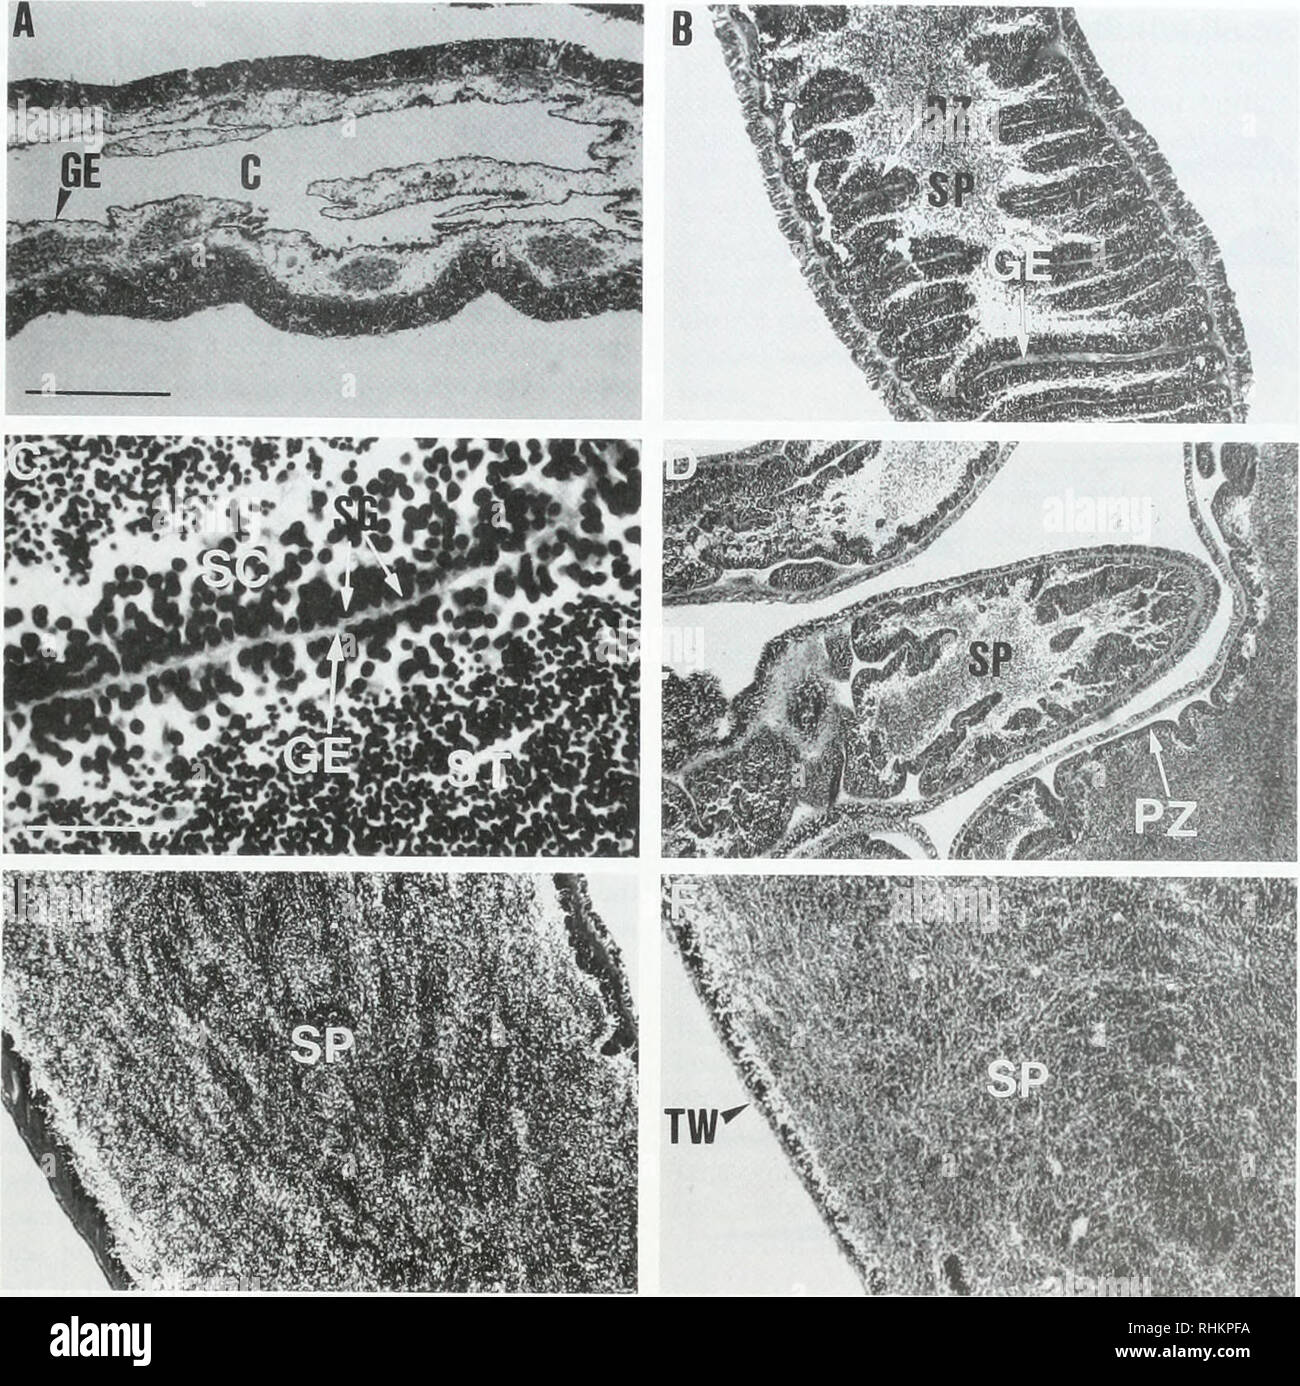 . The Biological bulletin. Biology; Zoology; Biology; Marine Biology. REPRODUCTIVE CYCLE OF PSOLUS 1-'ABR1CI1 135. Figure 9. Psolus fabricii. Light micrographs of testicular sections illustrating the spermatogenic cycle. (A) Post-spawning testis showing the germinal epithelium (GE) and channels where sperm passed during spawning (C); (B) Growth stage showing the highly convoluted germinal epithelium (GE) and the proliferation zone (PZ); (C) Growth stage showing the germinal epithelium, spermatogonia (SG), spermatocytes (SC) spermatids (ST) and spermatozoa (SP) in successive layers progressing  Stock Photo